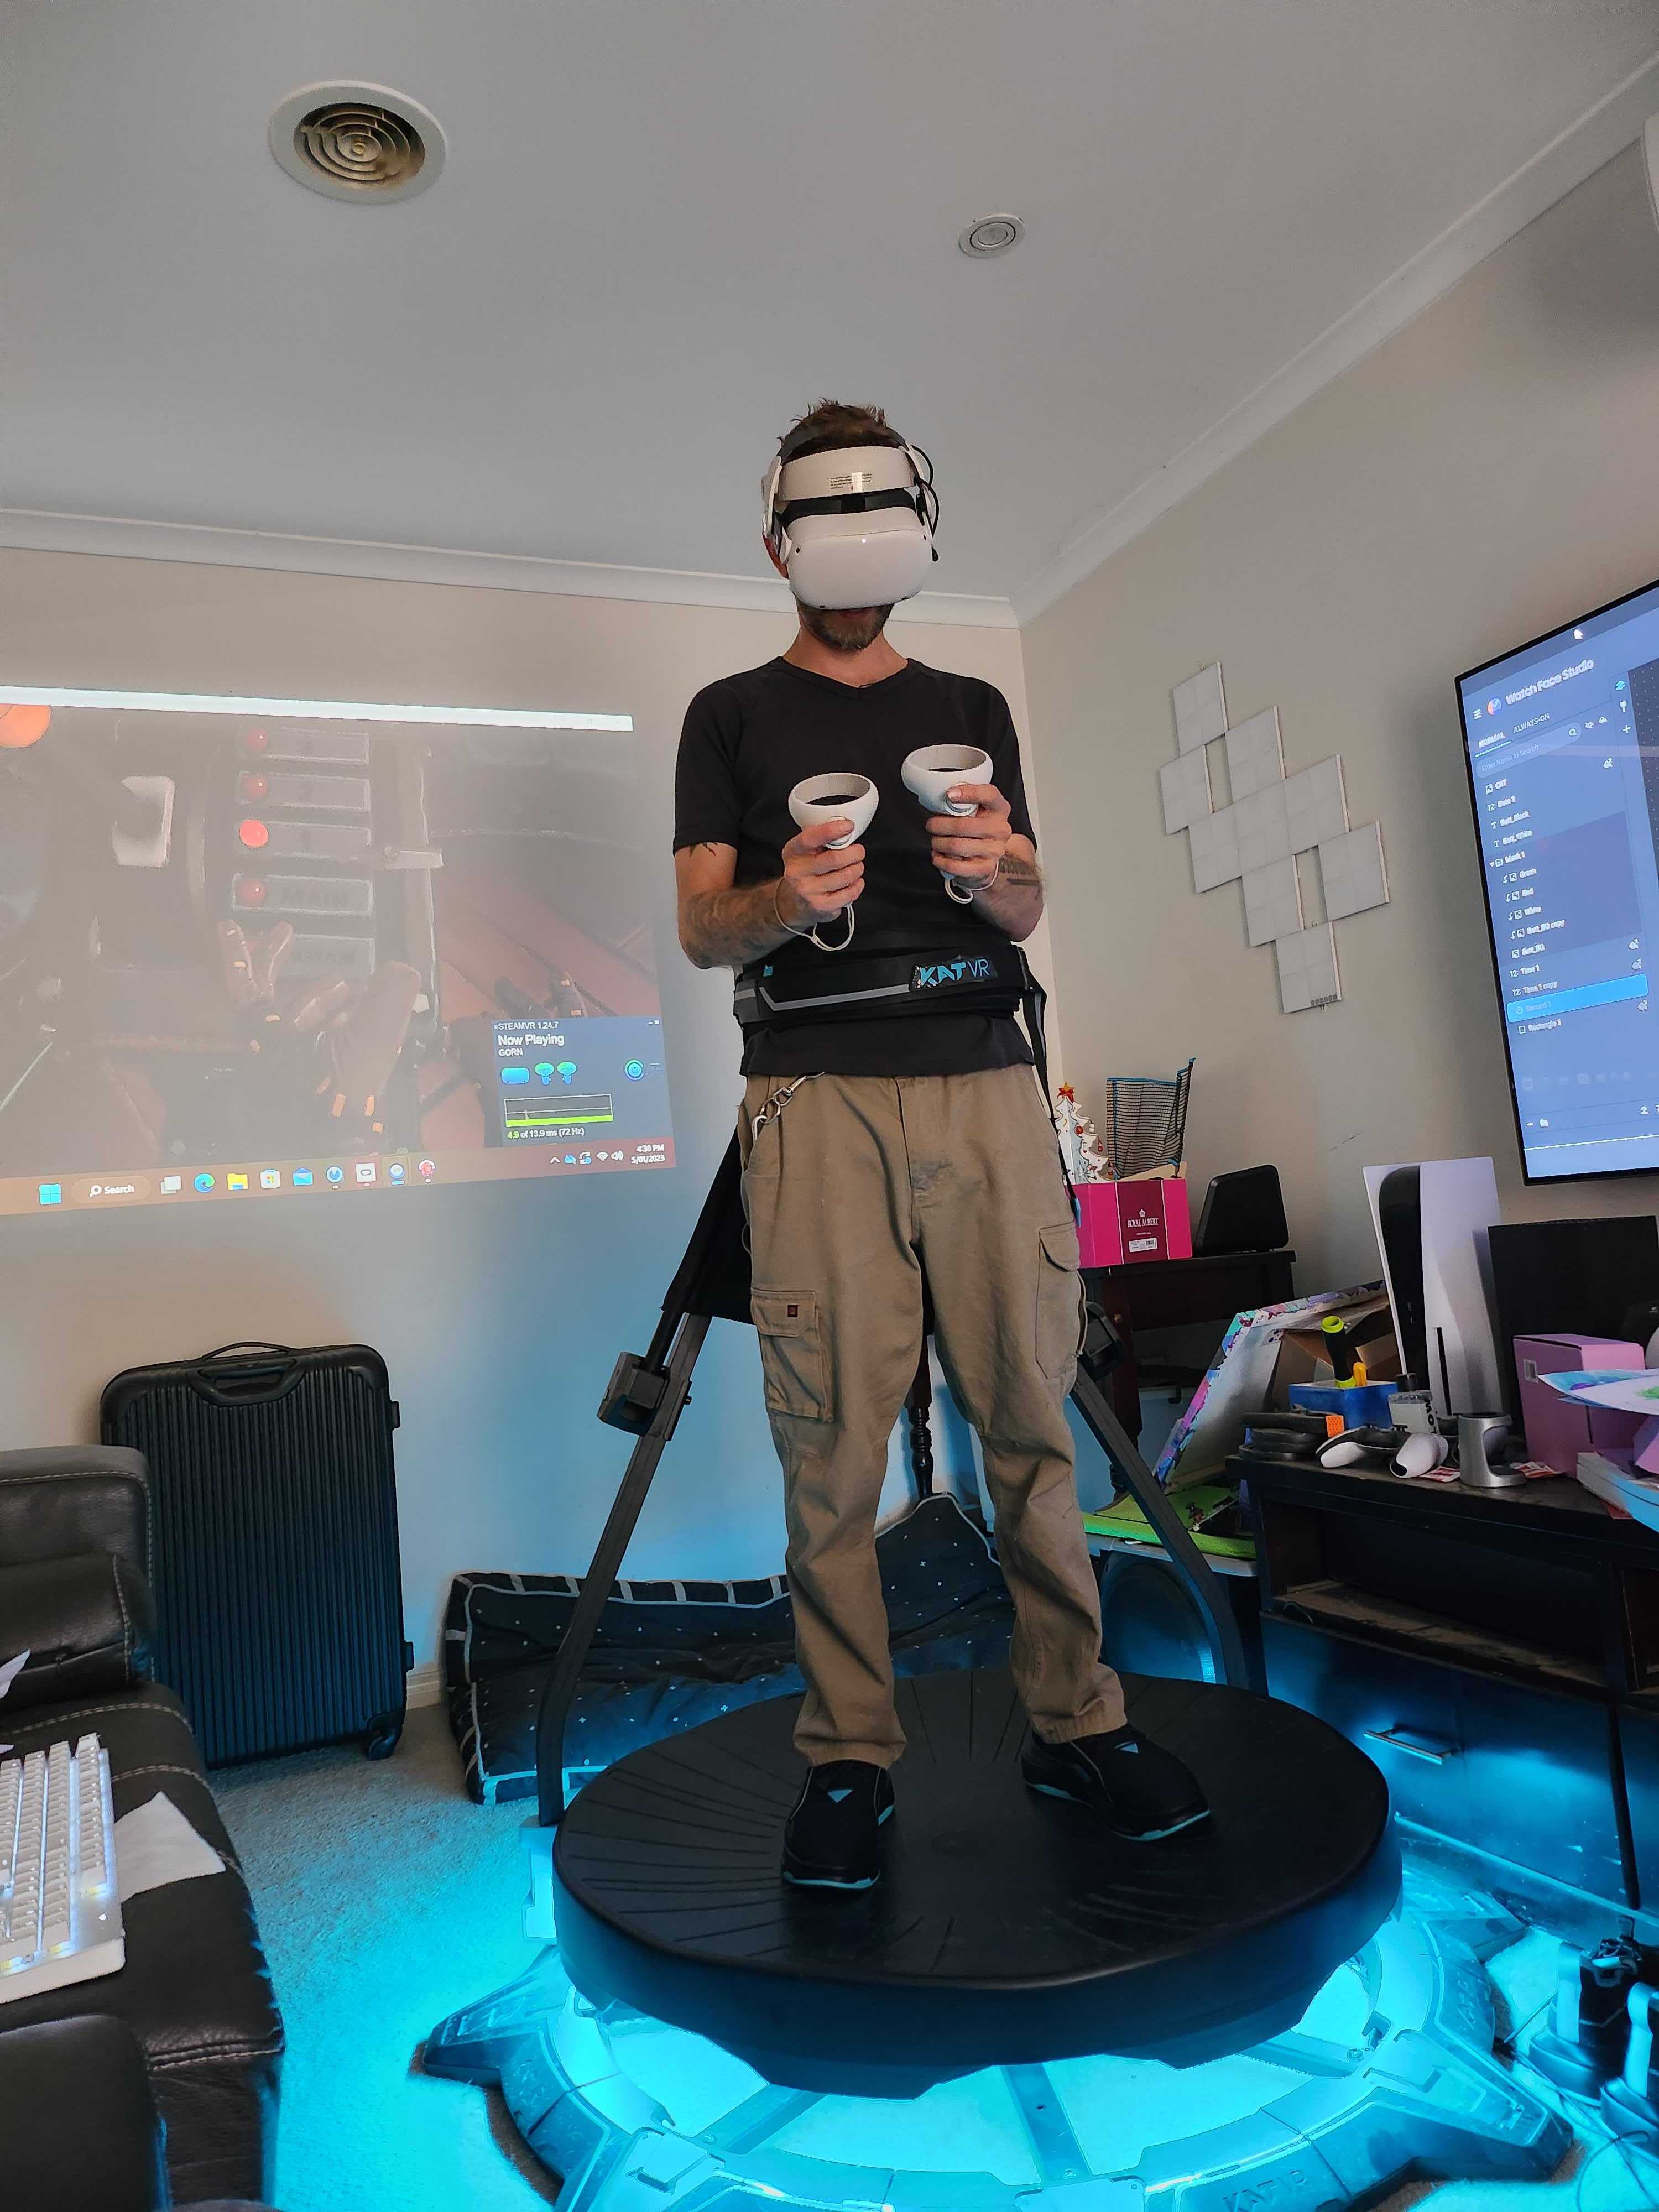 A Kat VR treadmill in action.